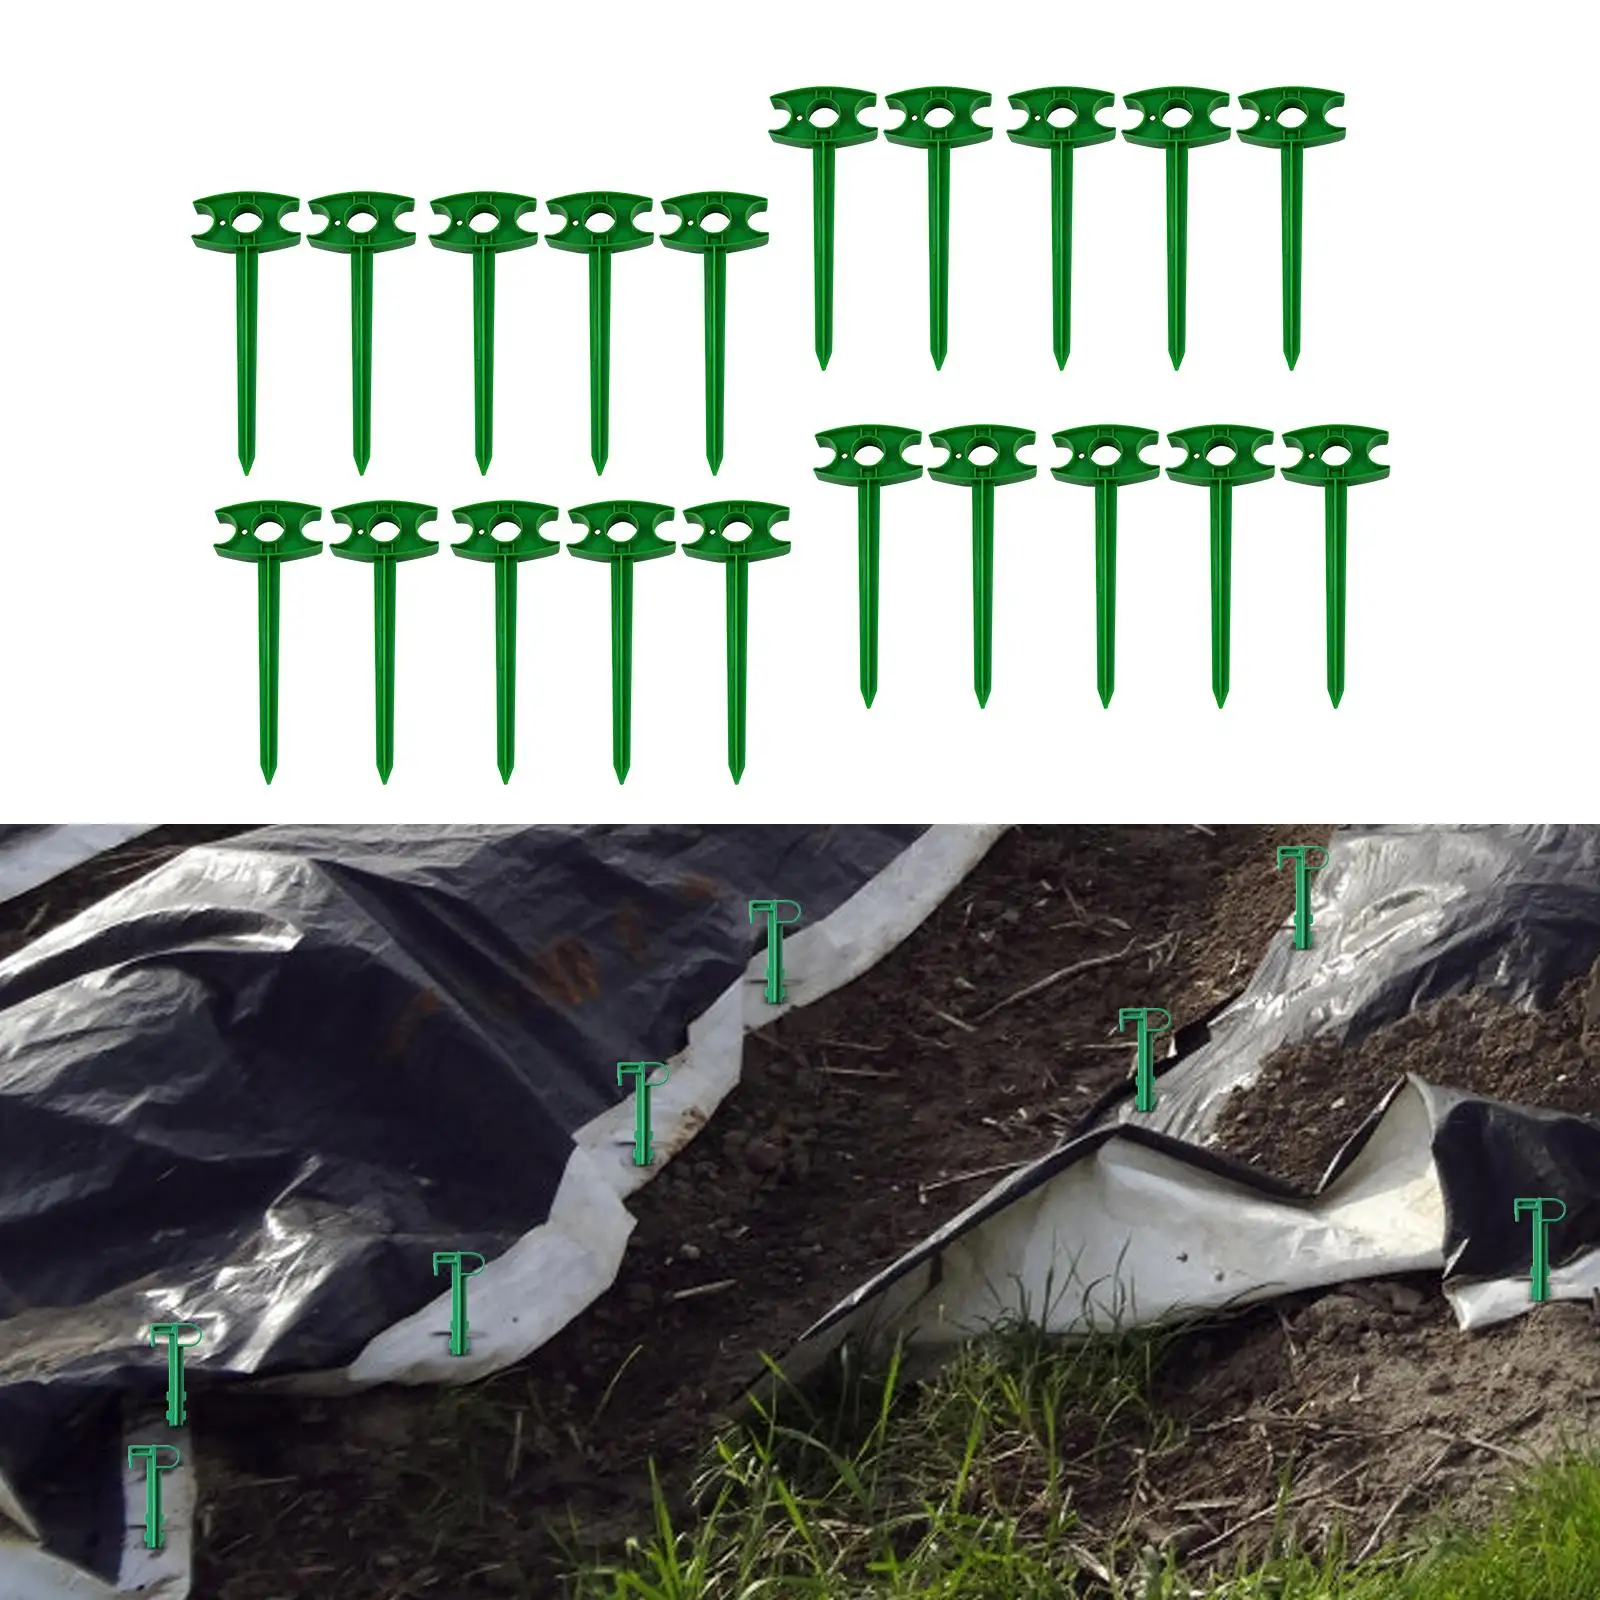 20x Garden Stakes Landscape Stakes for Landscape Fabric Lawn Edging Camping